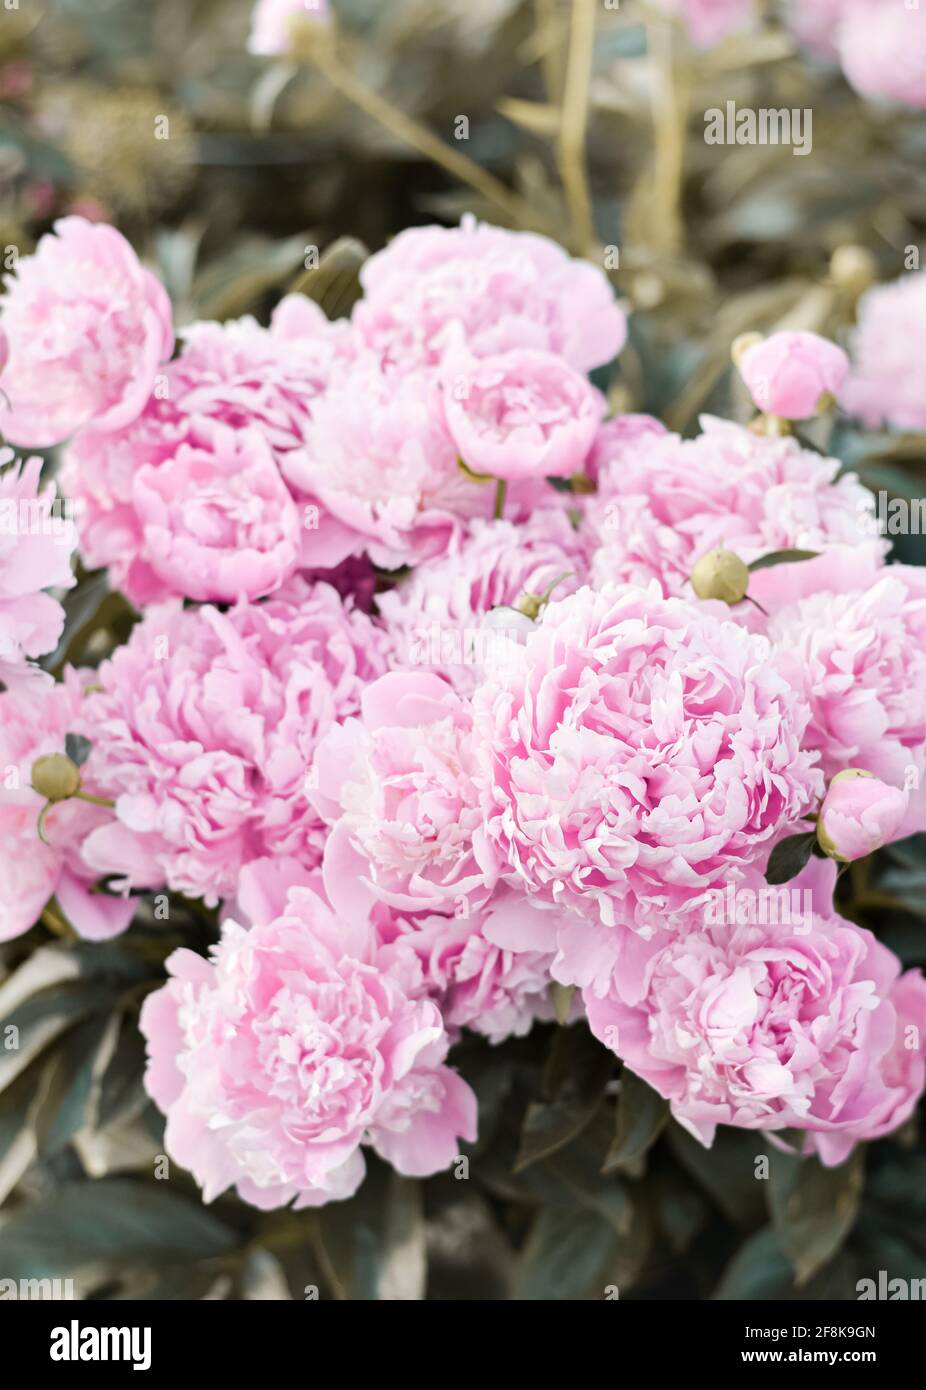 Common Garden Peony (Chinese Peony) (Paeonia lactiflora), 'Monsieur Jules Elie' shrub blooming in early summer with pink flowers Stock Photo